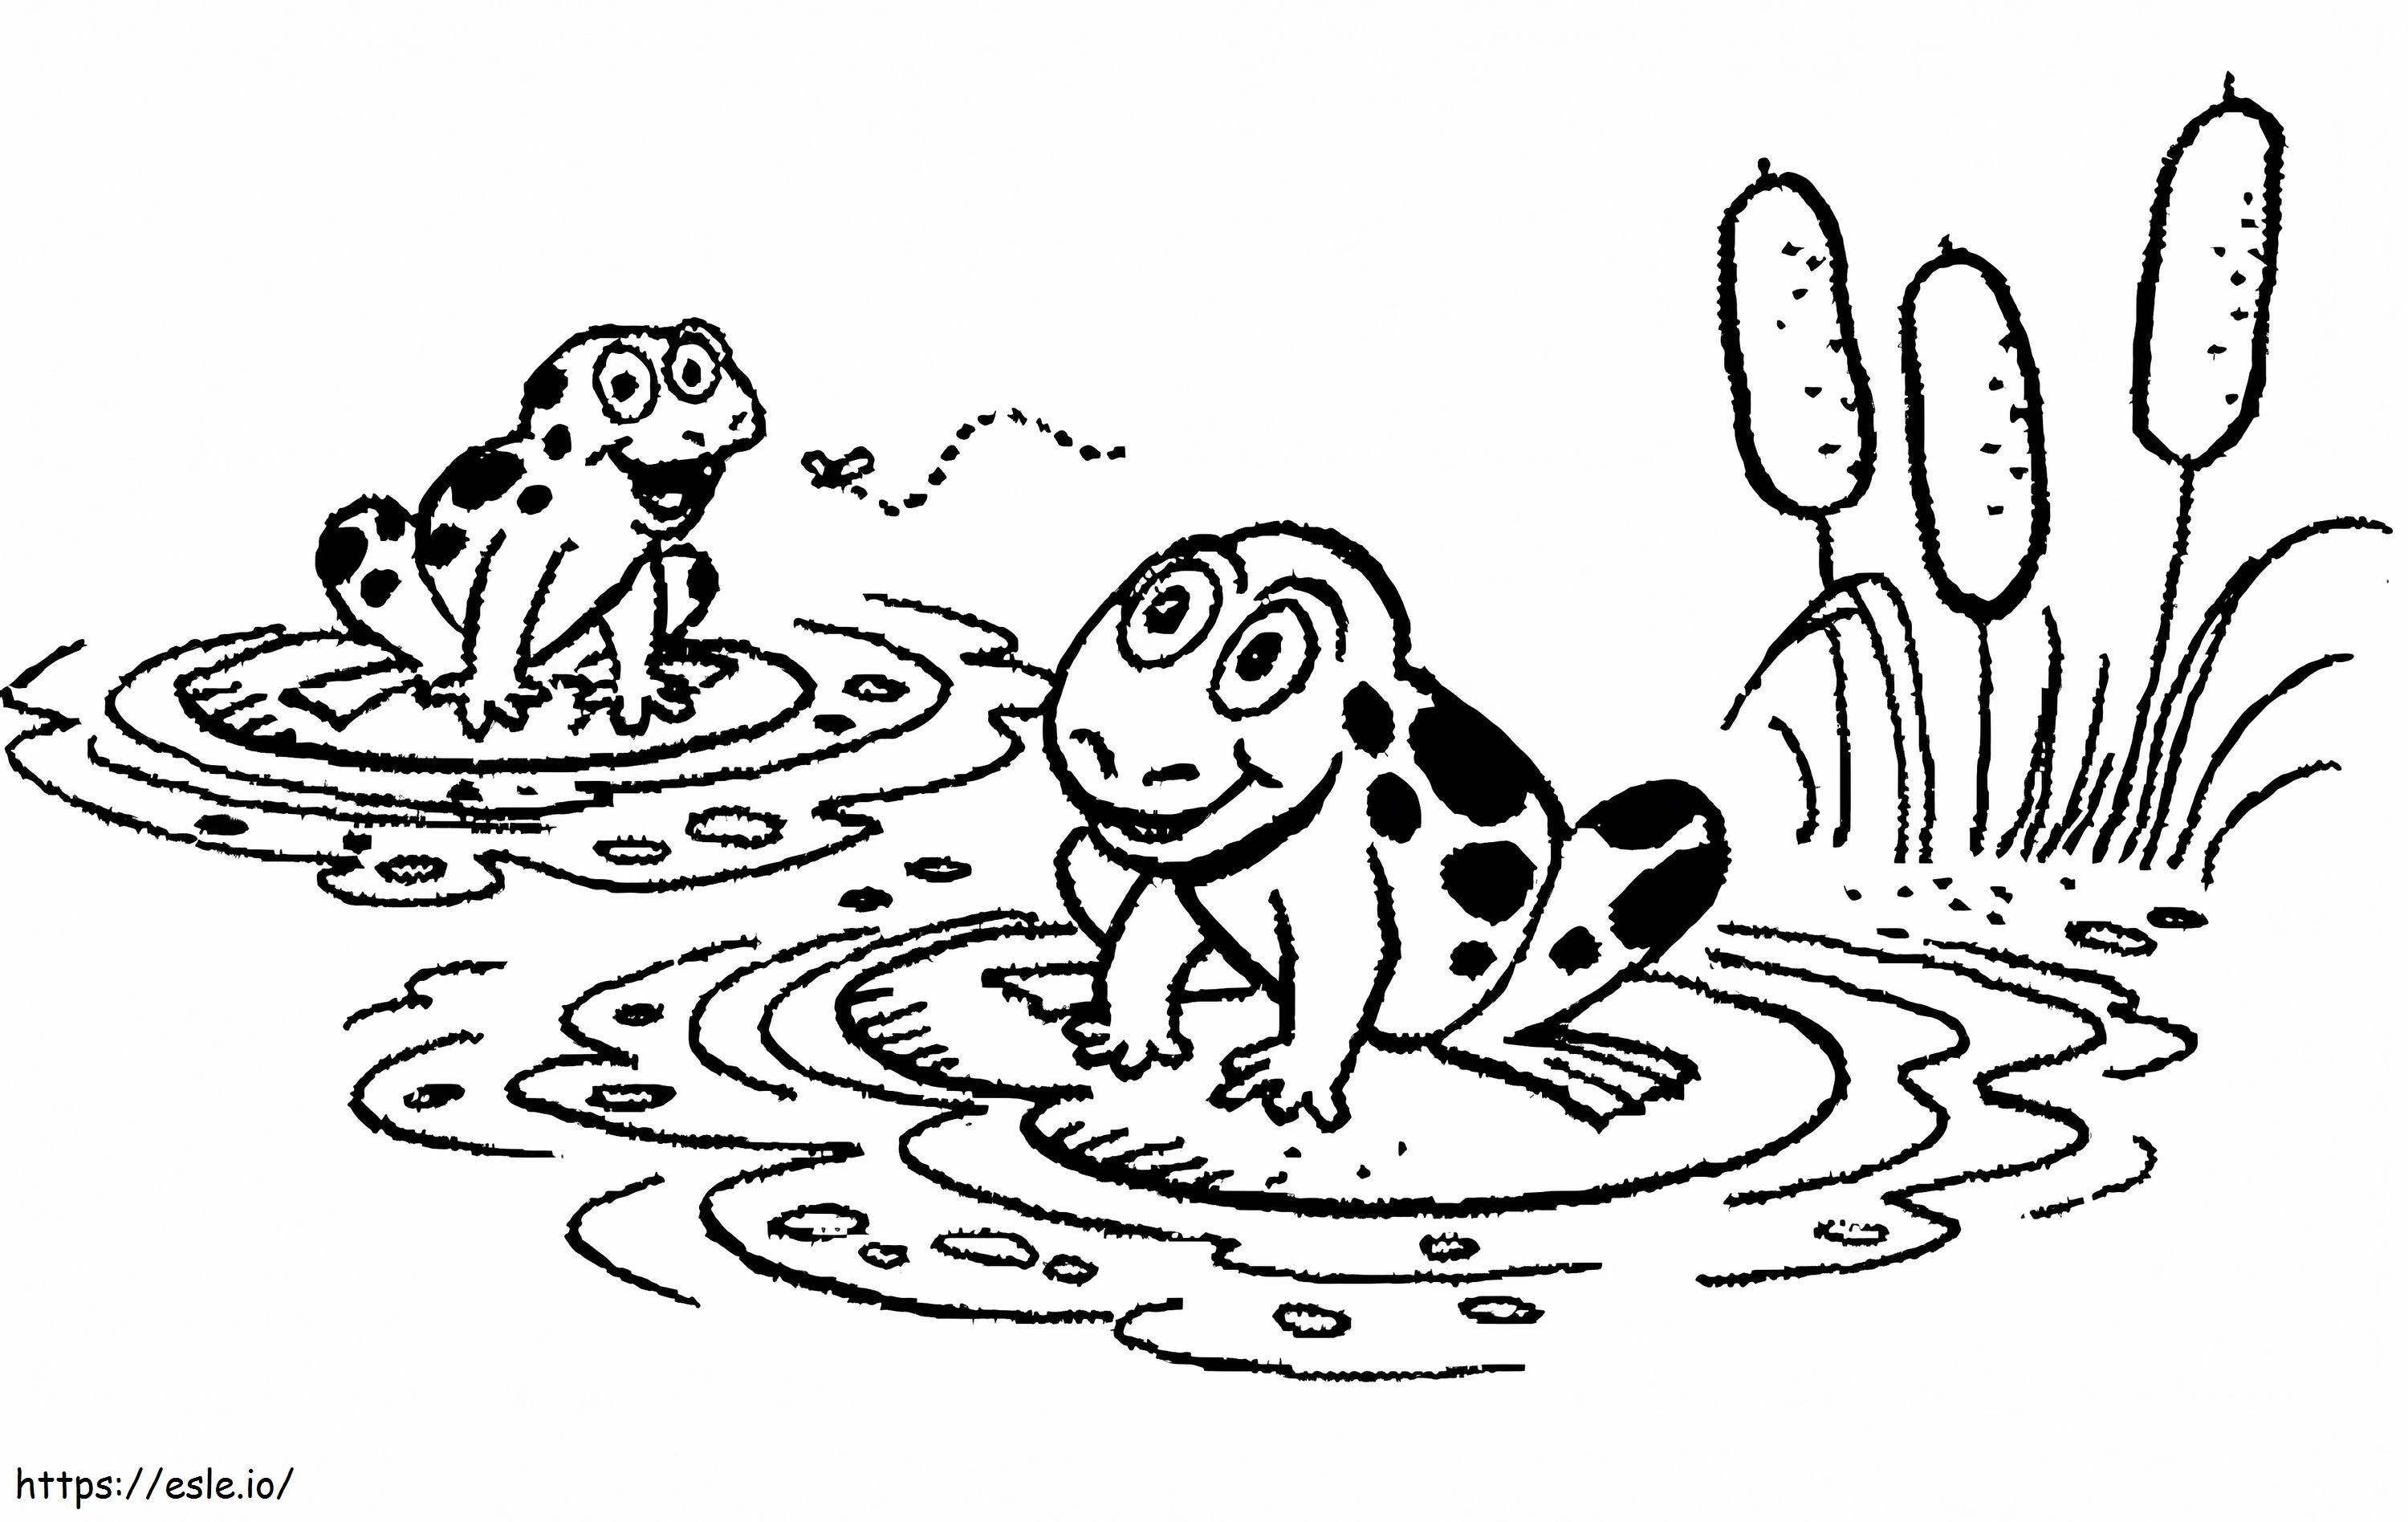 Frog On Lily Pad coloring page